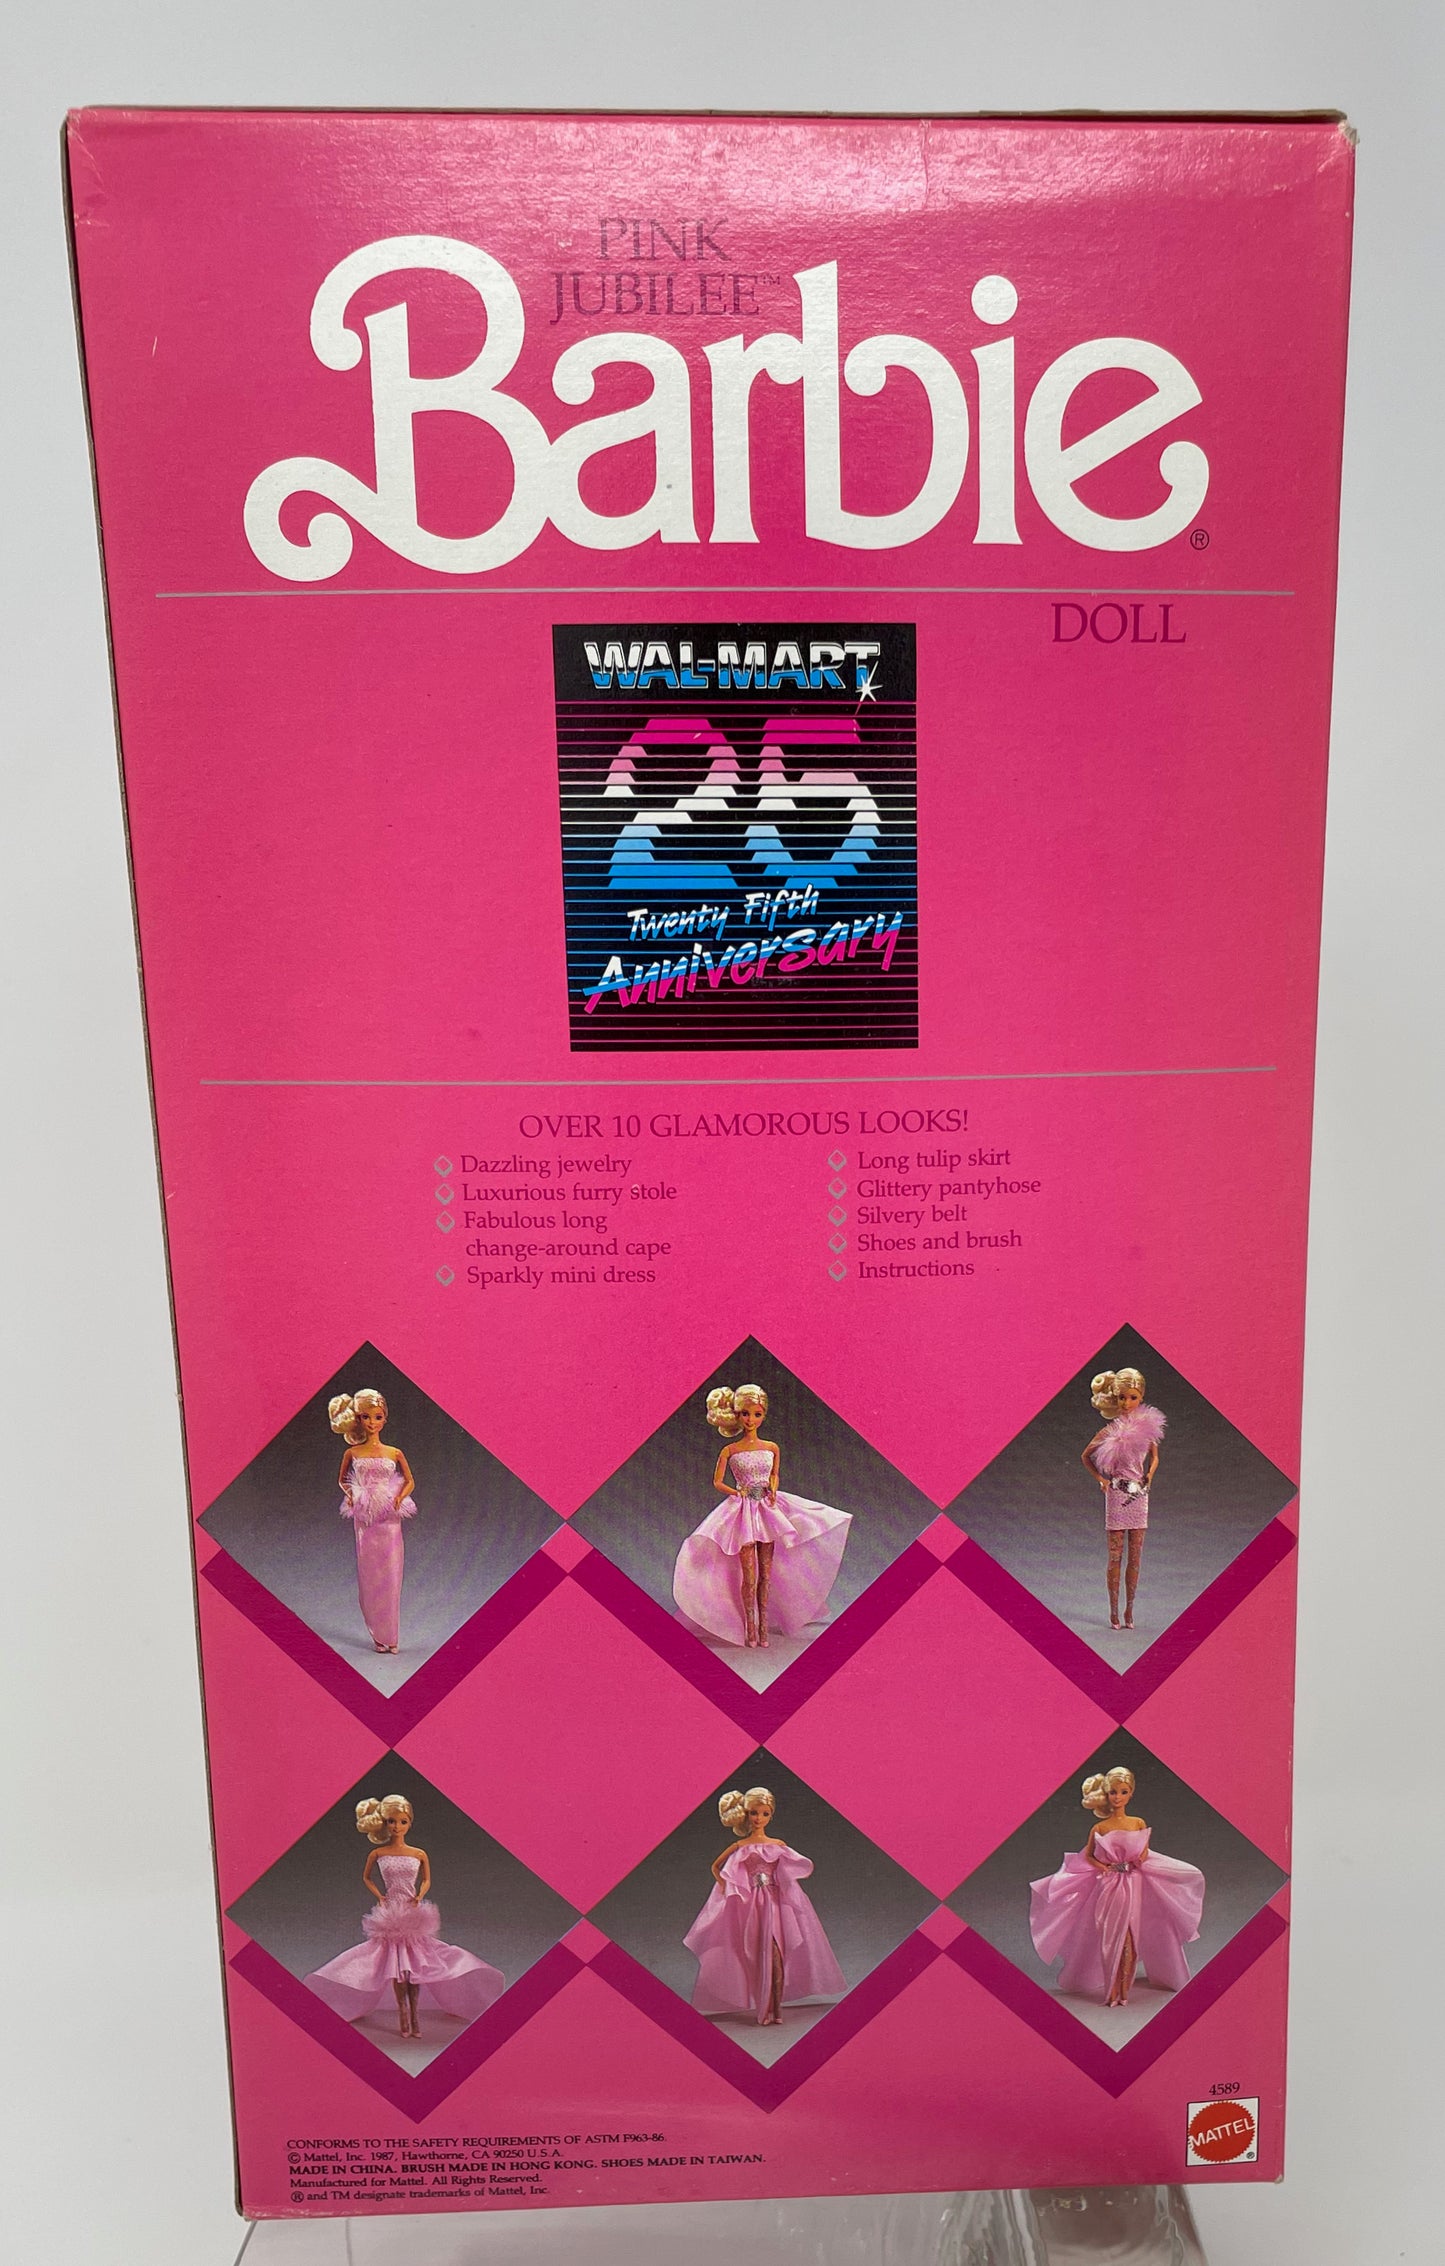 PINK JUBILEE BARBIE - WALMART 25TH ANNIVERSARY SPECIAL LIMITED EDITION #4589 - MATTEL 1987